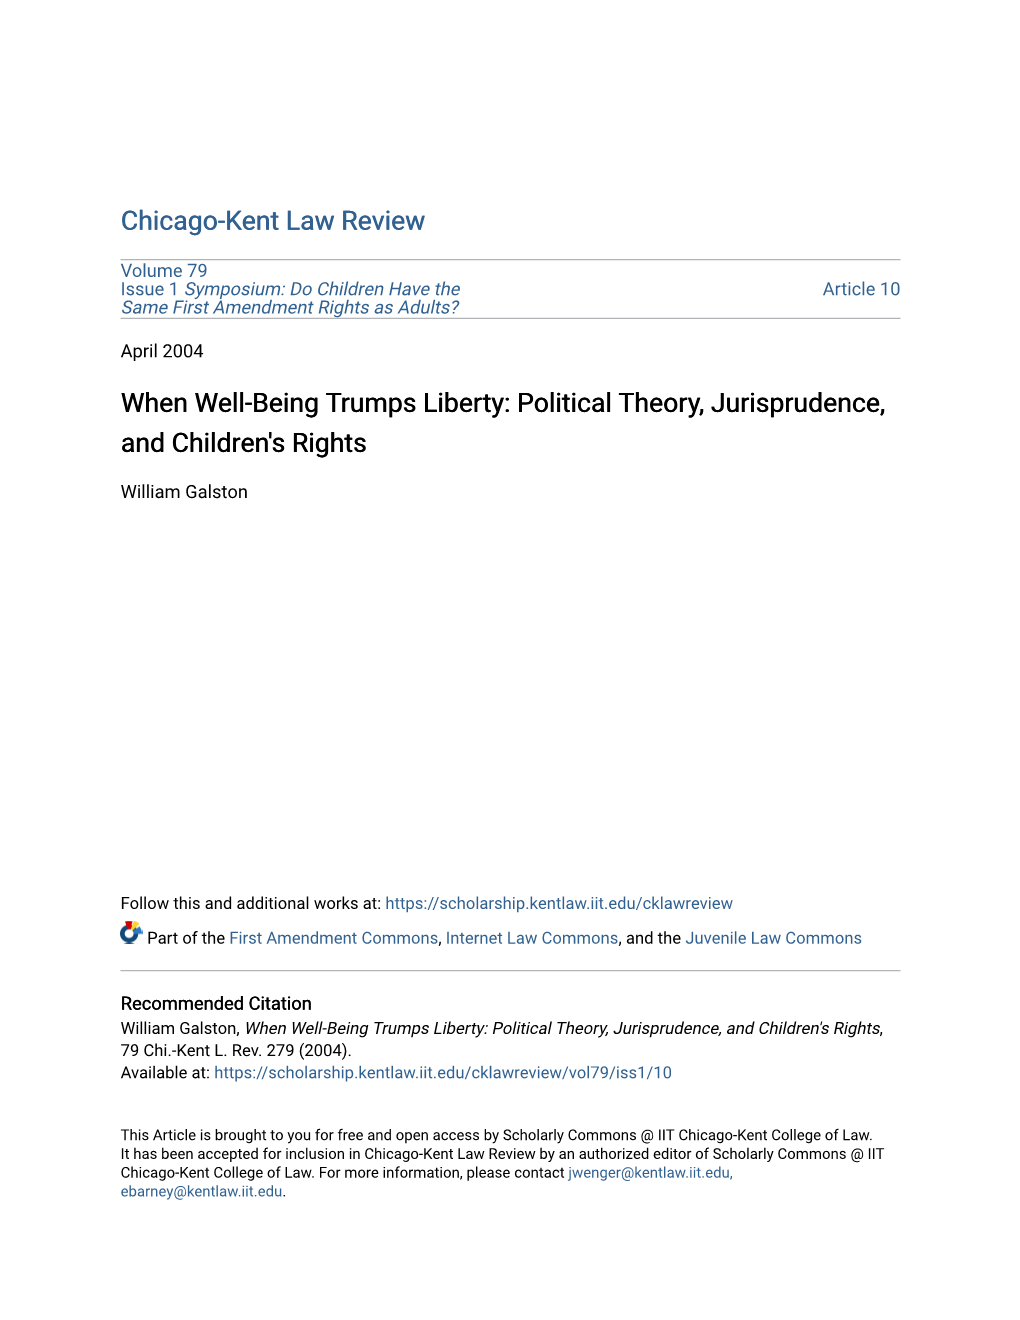 When Well-Being Trumps Liberty: Political Theory, Jurisprudence, and Children's Rights